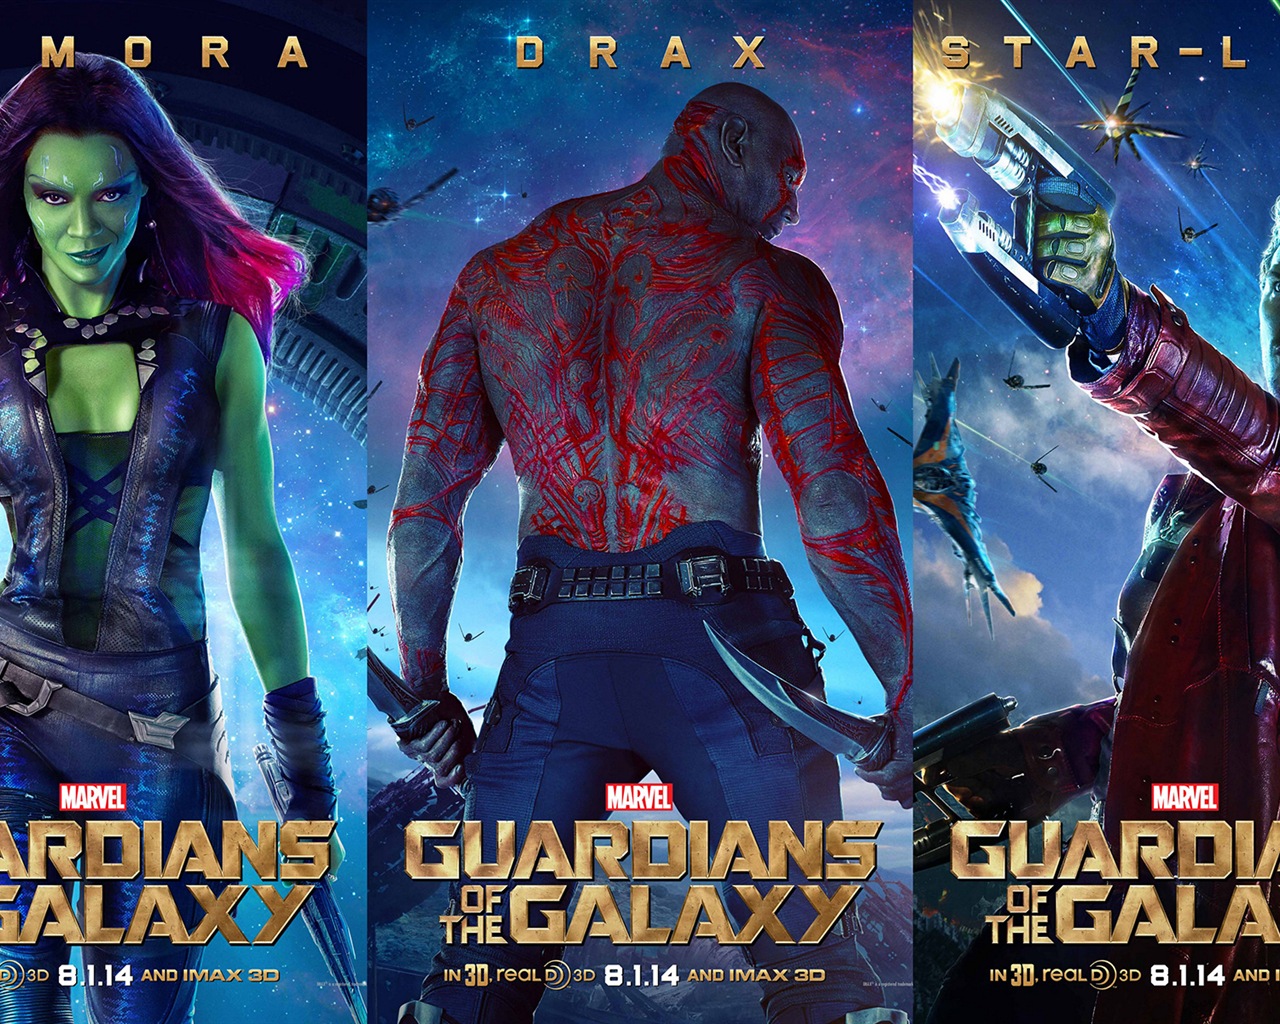 Guardians of the Galaxy 2014 HD movie wallpapers #12 - 1280x1024